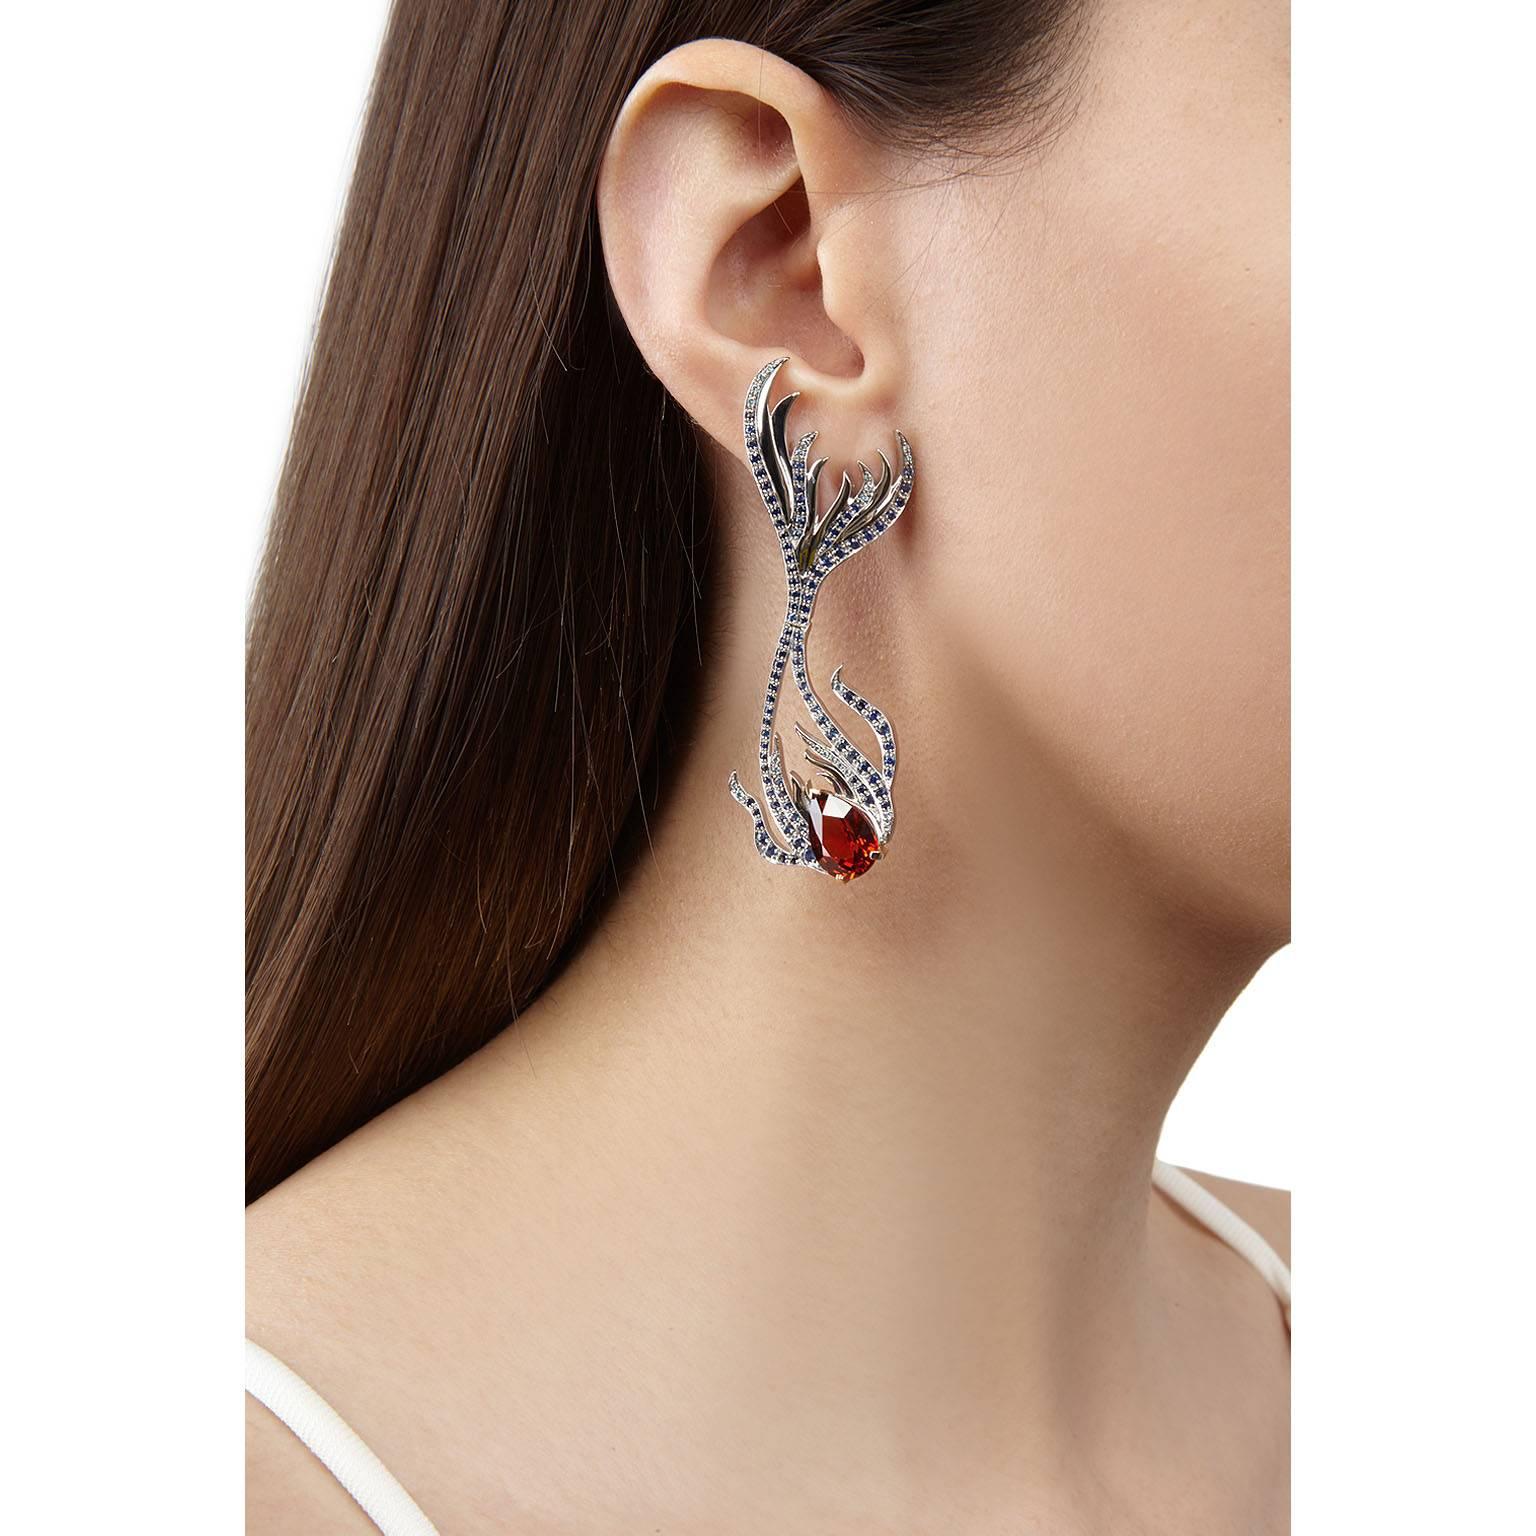 These spectacular Sirena earrings are one of Milena Kovanovic's most head-turning creations to date. The super sized exotic fishes are crafted in sinuous white gold and hinged at their centre to provide a subtle movement when worn. Pavé set with a